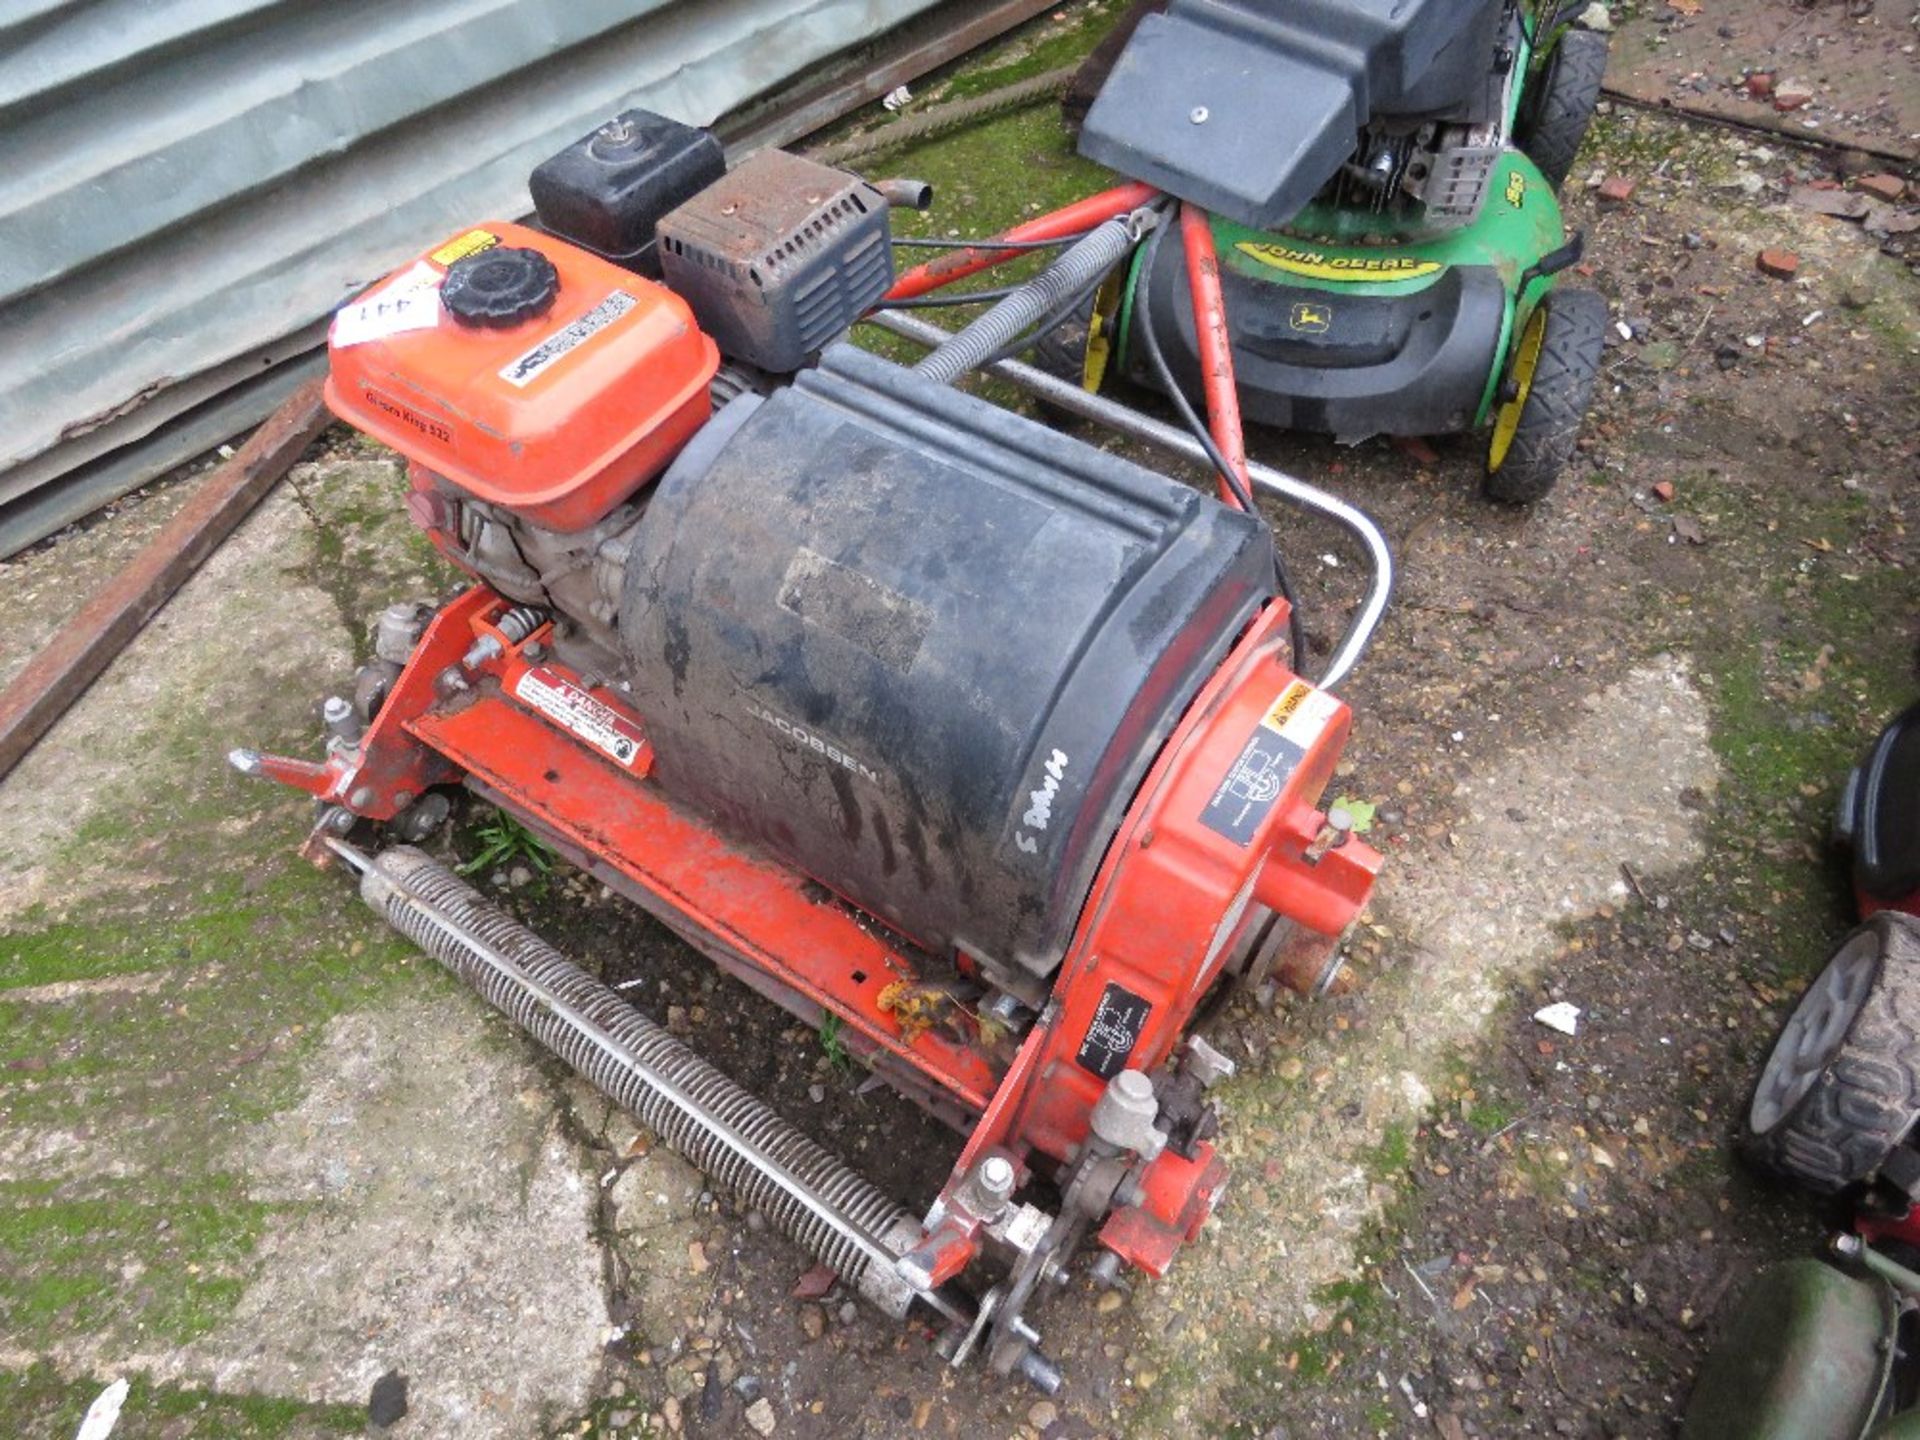 JACOBSEN PETROL ENGINED GREEN KING 522 CYLINDER LAWN MOWERN HONDA ENGINE, NO BOX. THIS LOT IS SOL - Image 2 of 6